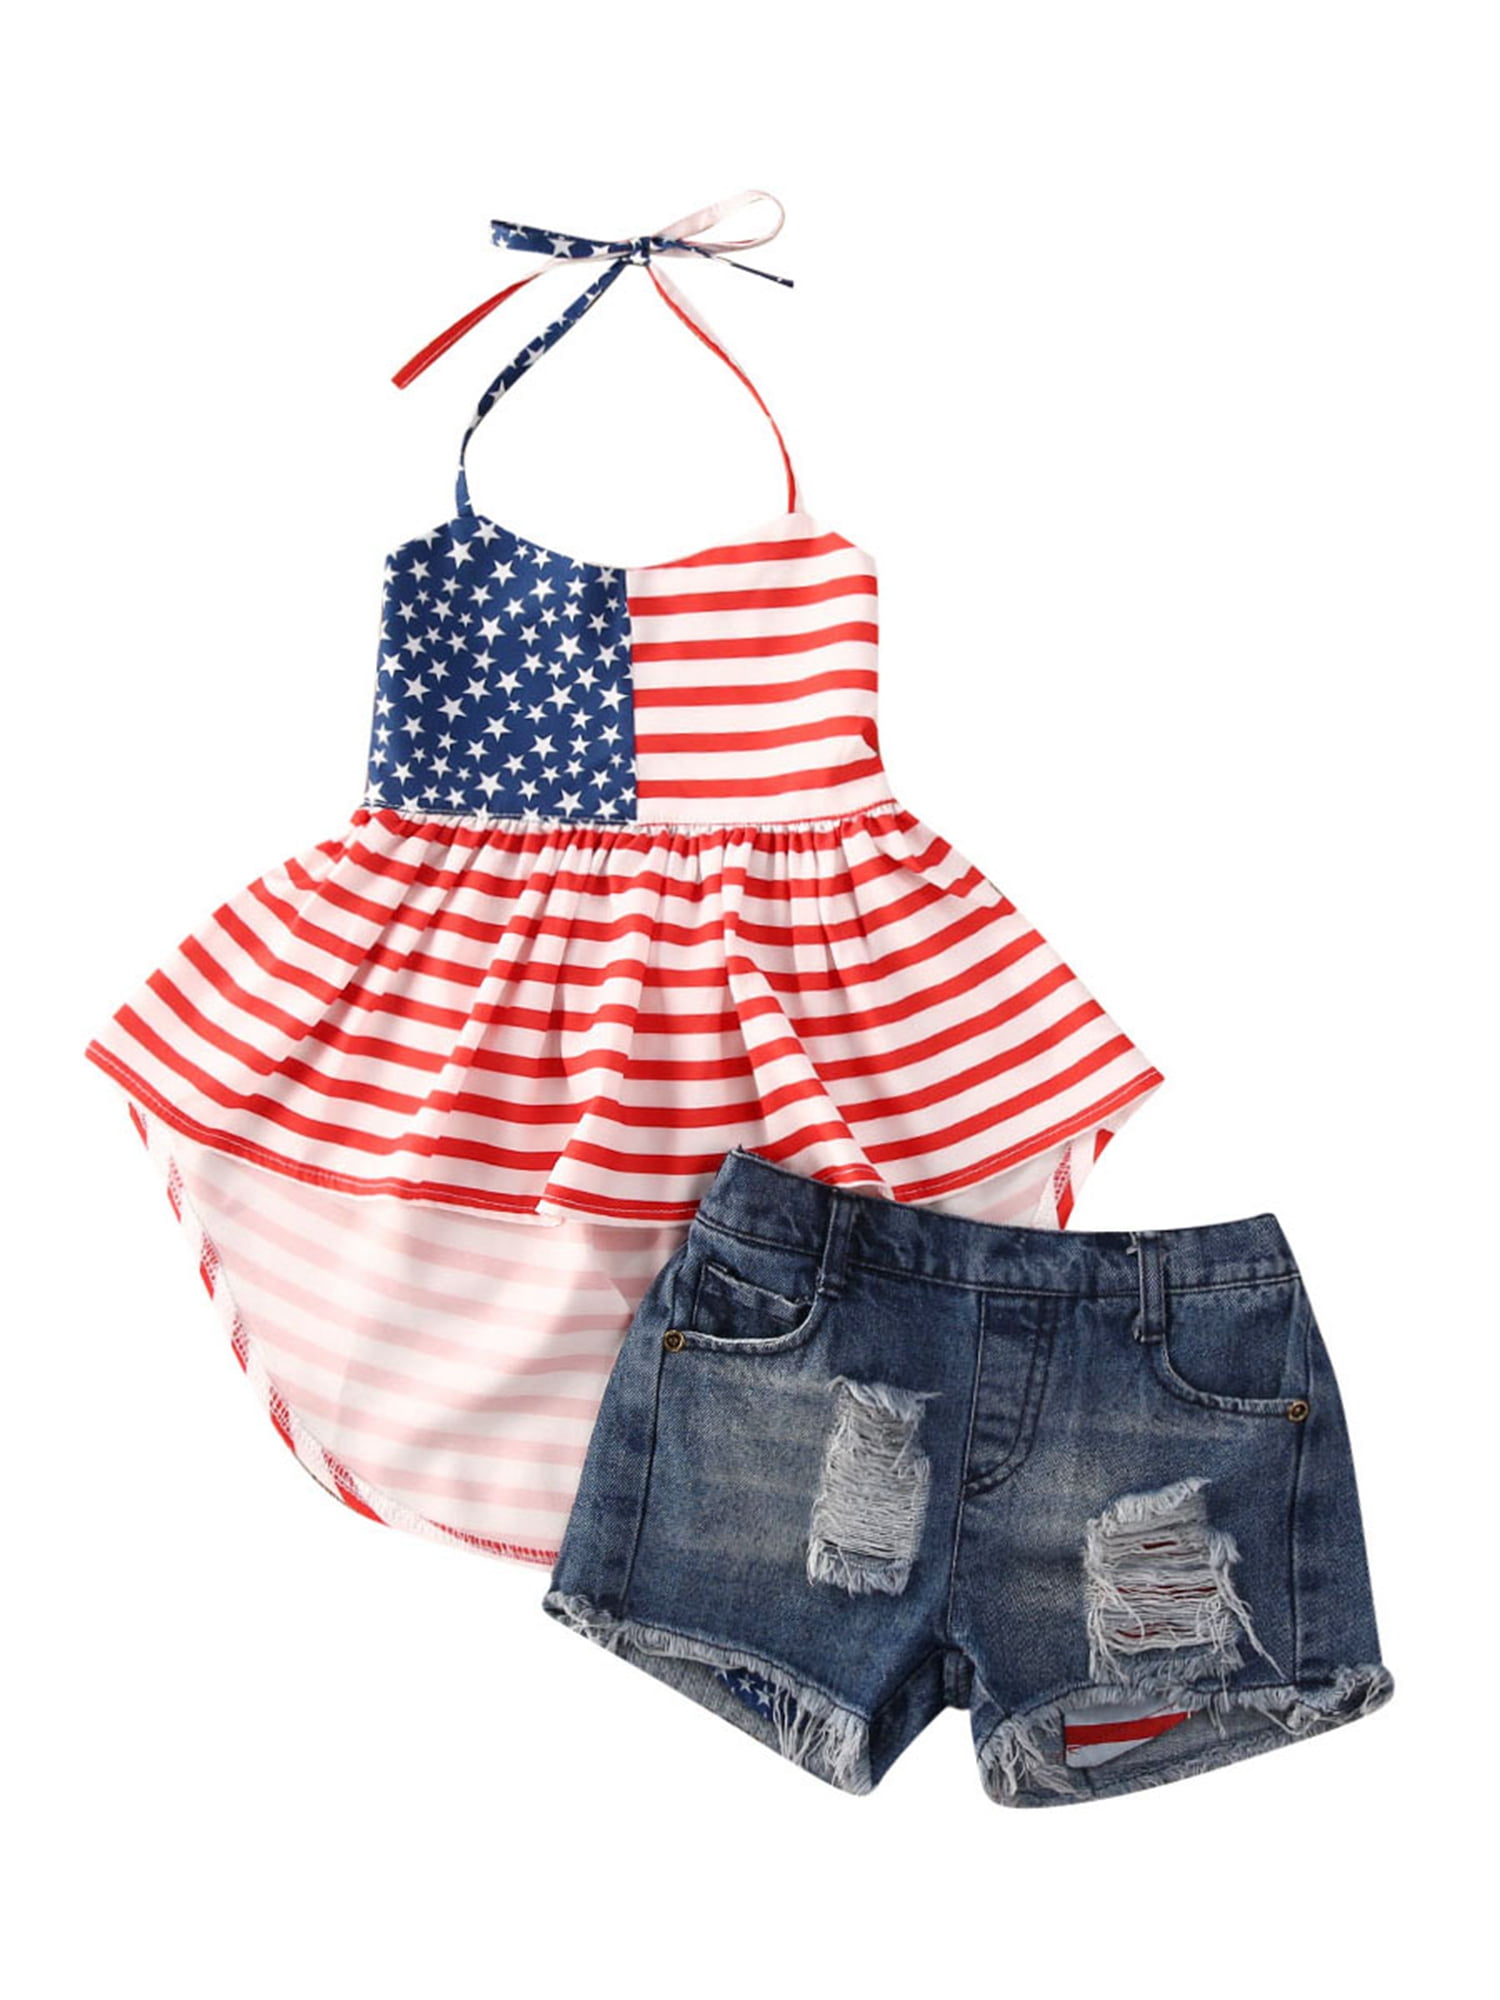 American Flag Stars Stripe Shorts Pants Independence Day Outfit Clothes Baby 4th of July Shorts Set Black Camisole